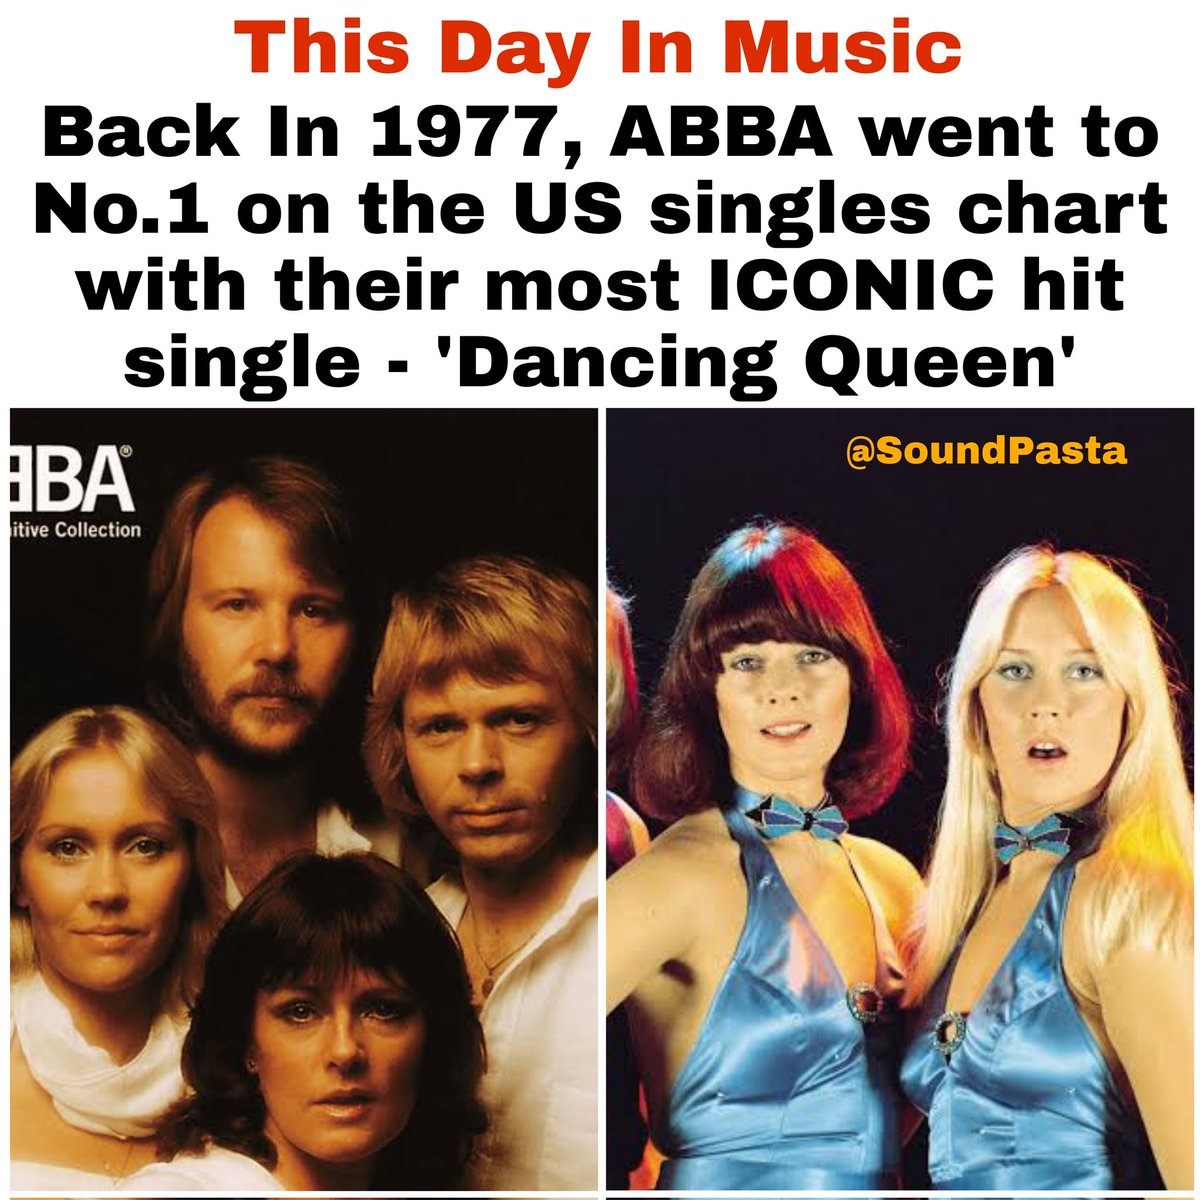 The song was also a No.1 in the UK in 1976 and 12 other countries.

#MusicThrowback #ABBA